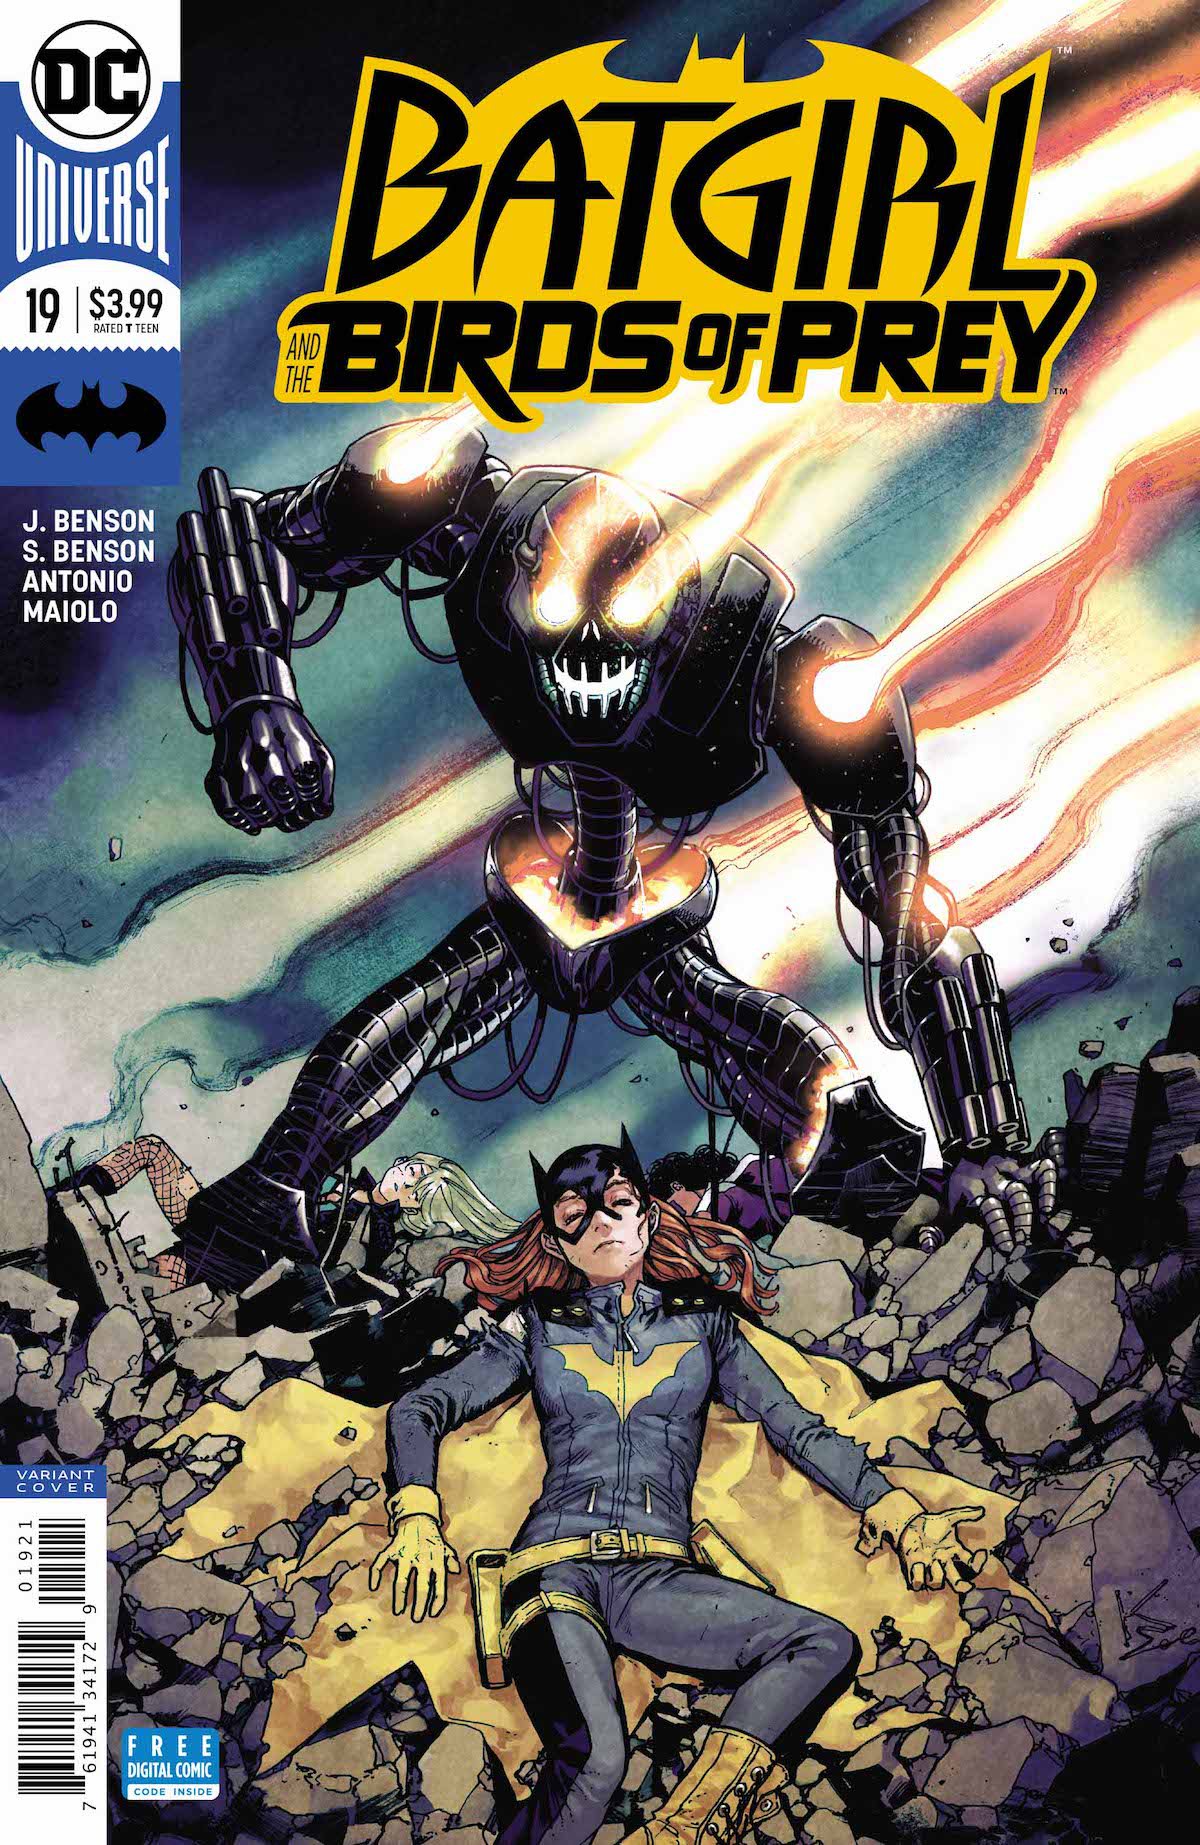 Batgirl and the Birds of Prey #19 variant cover